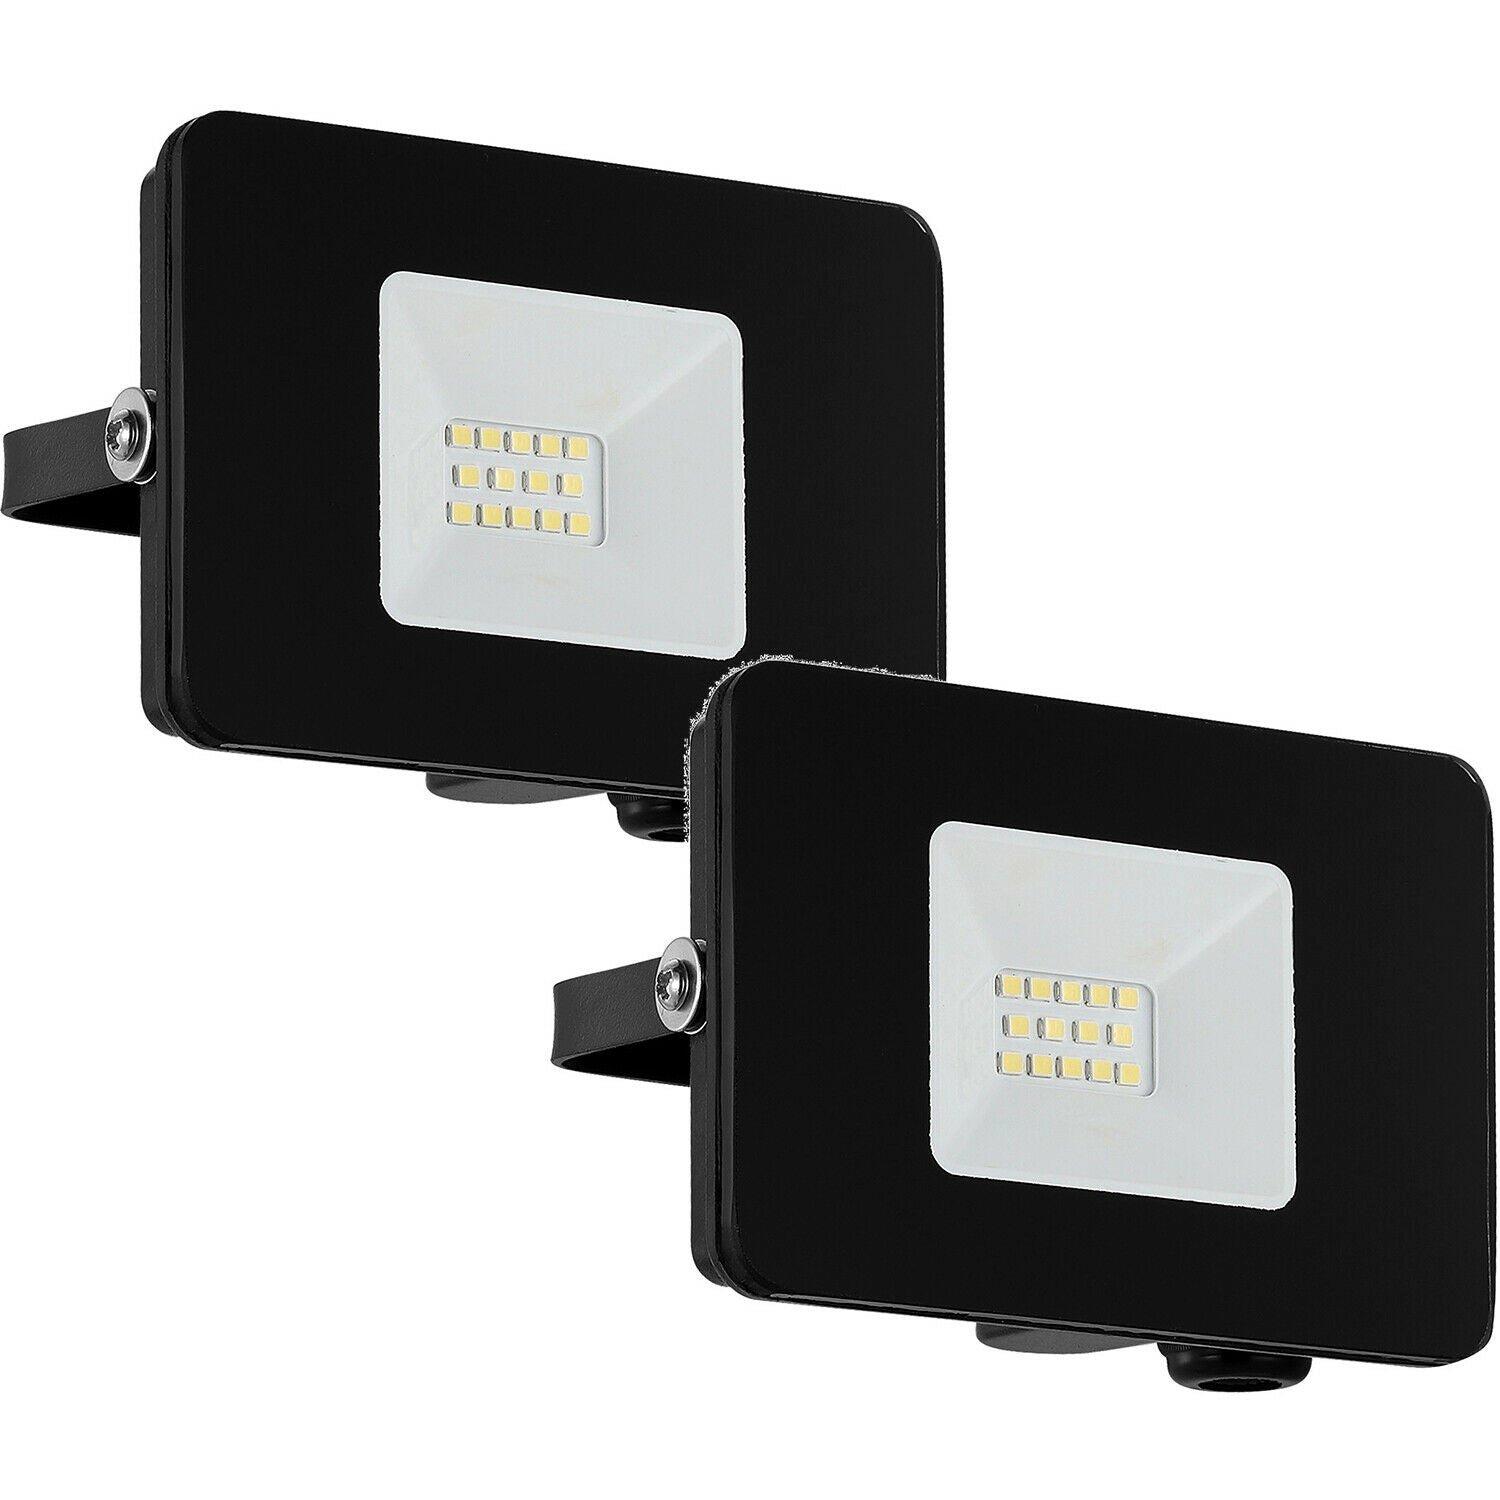 2 PACK IP65 Outdoor Wall Flood Light Black Adjustable 10W LED Porch Lamp